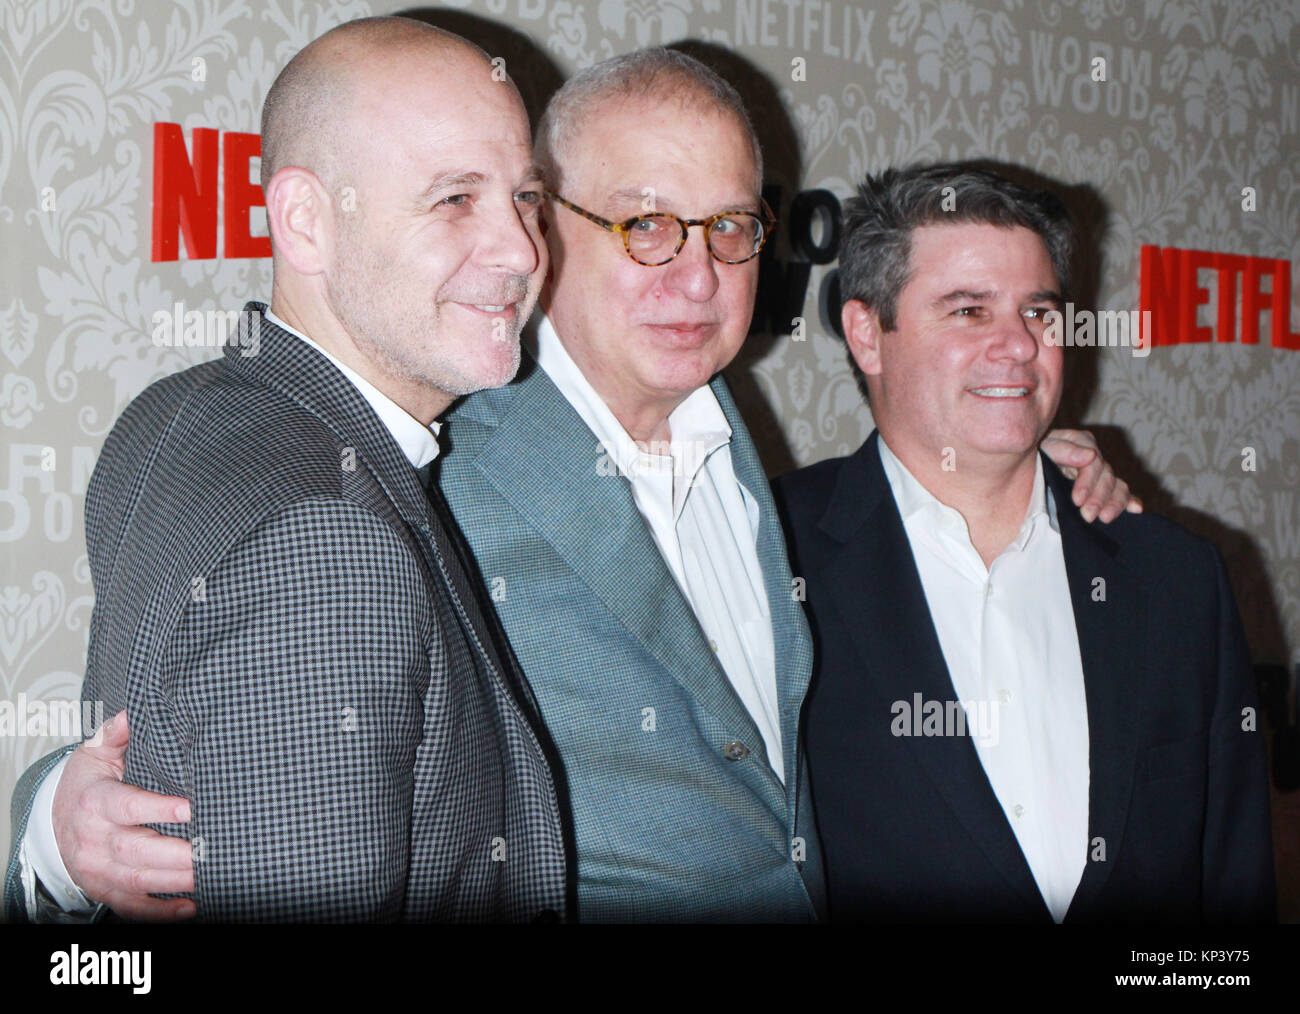 New York, NY, USA. 12th Dec, 2017. Peter Friedlander, Errol Morris, Adam Del Leo at the Netflix premiere of Wormwood at The Campbell in New York City on December 12, 2017. Credit: Rw/Media Punch/Alamy Live News Stock Photo